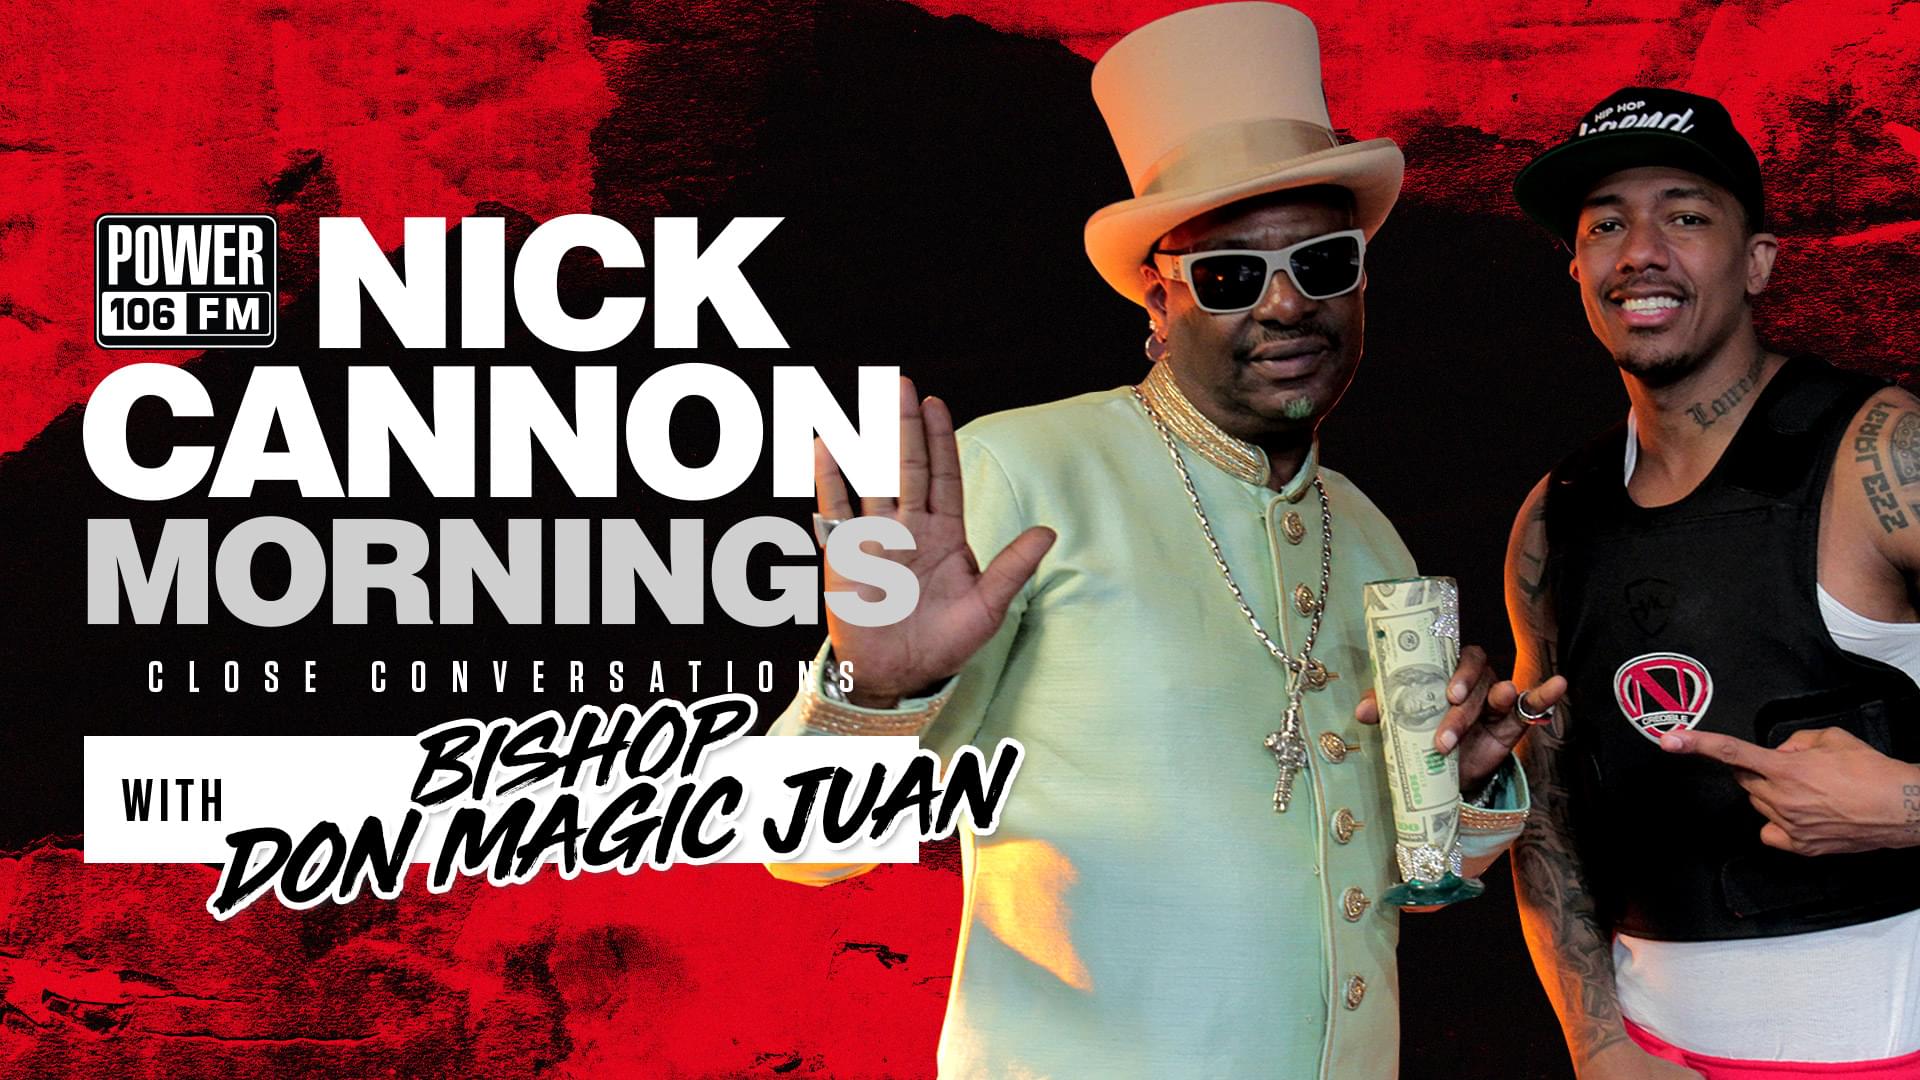 Bishop Don “Magic” Juan On Being #1 Pimp In The Game, Going From Pimping To Preaching, & More!